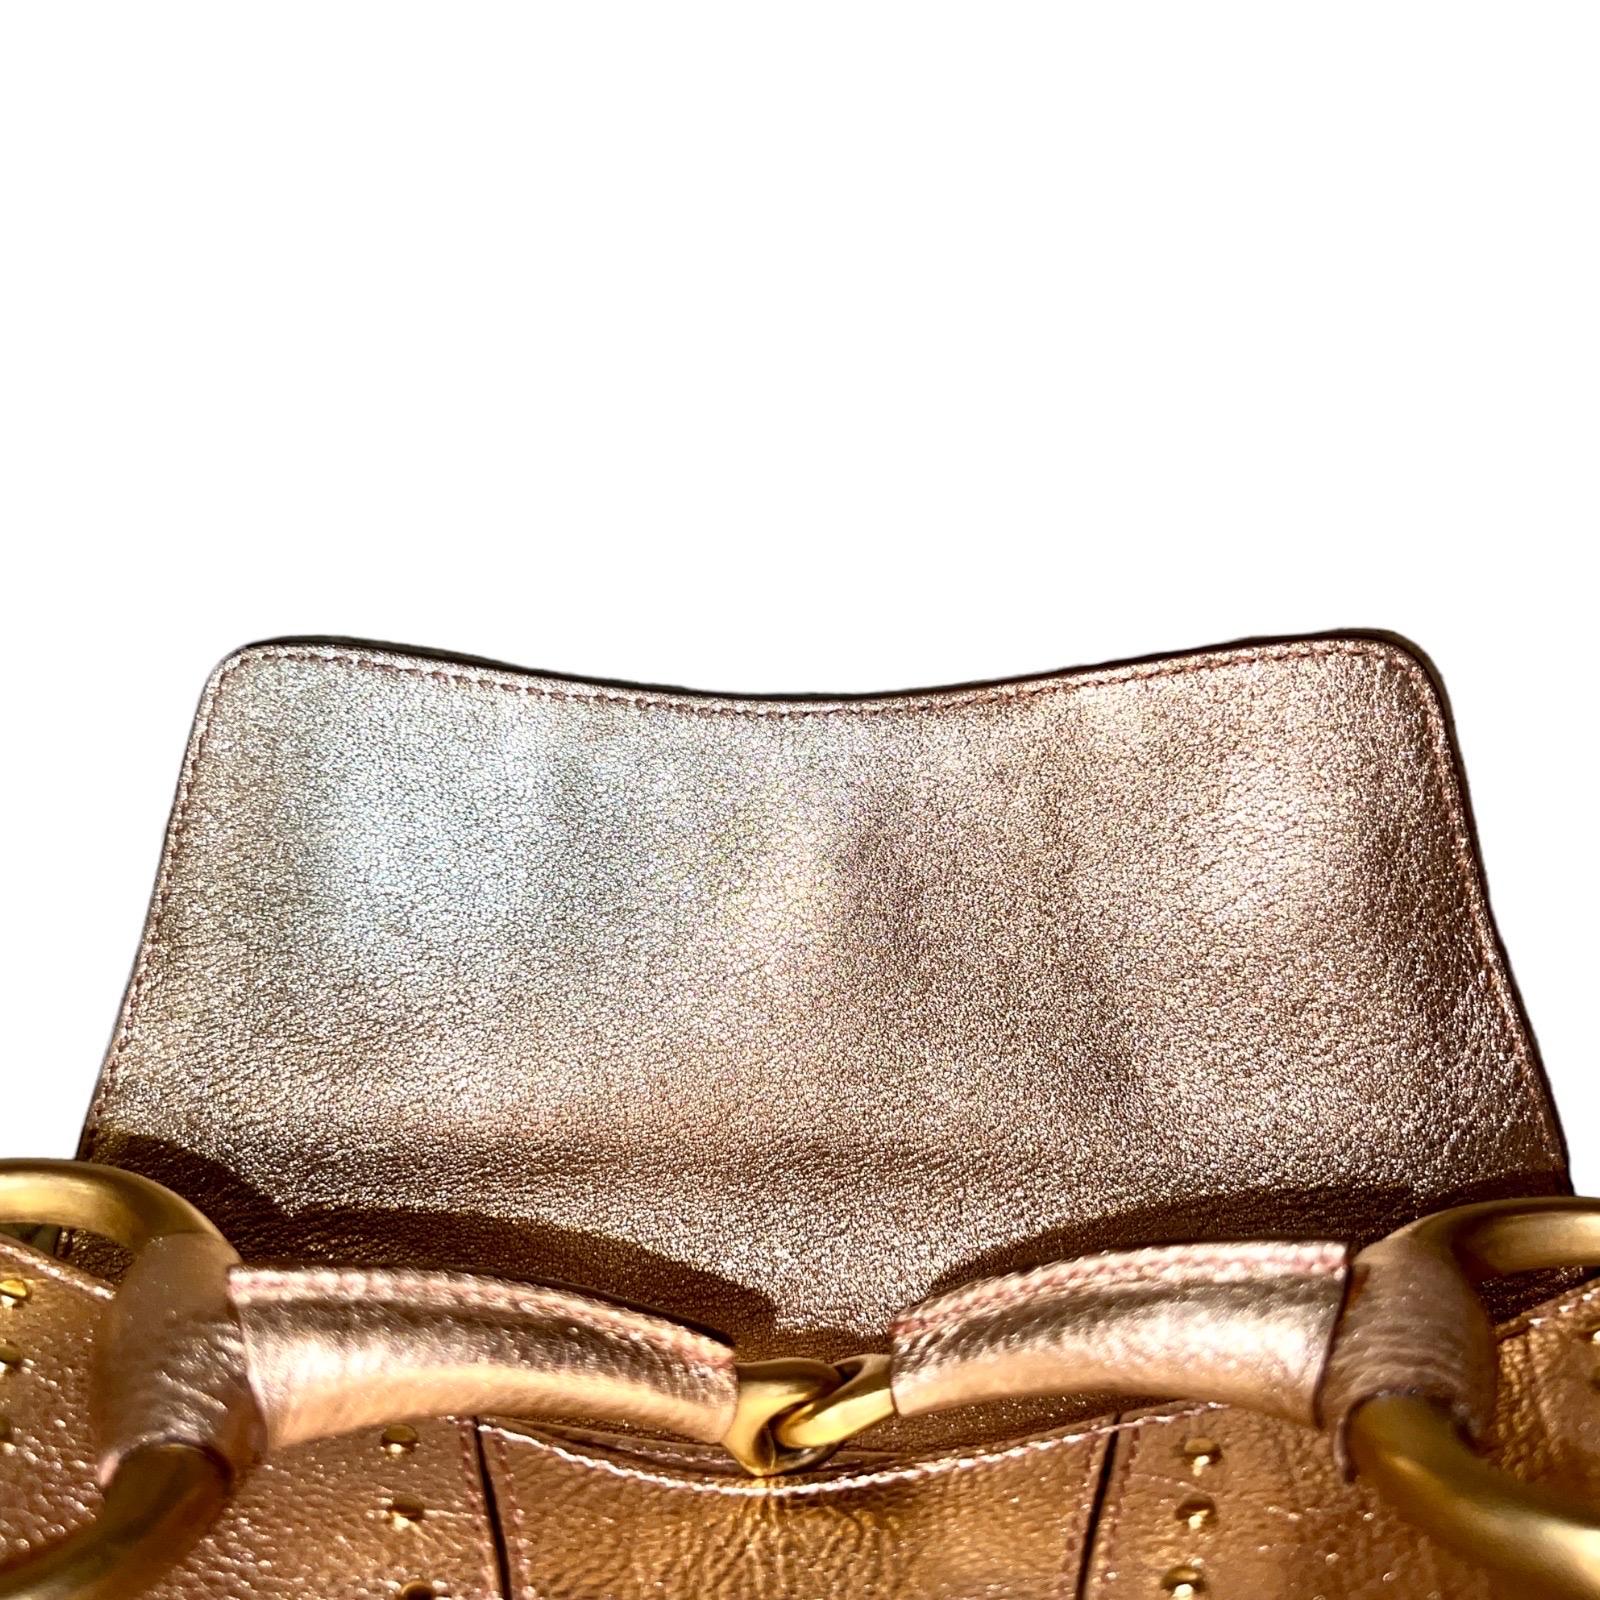 Gucci By Tom Ford FW 2003 Metallic Pink Barbiecore Studded Horsebit Clutch Bag 6